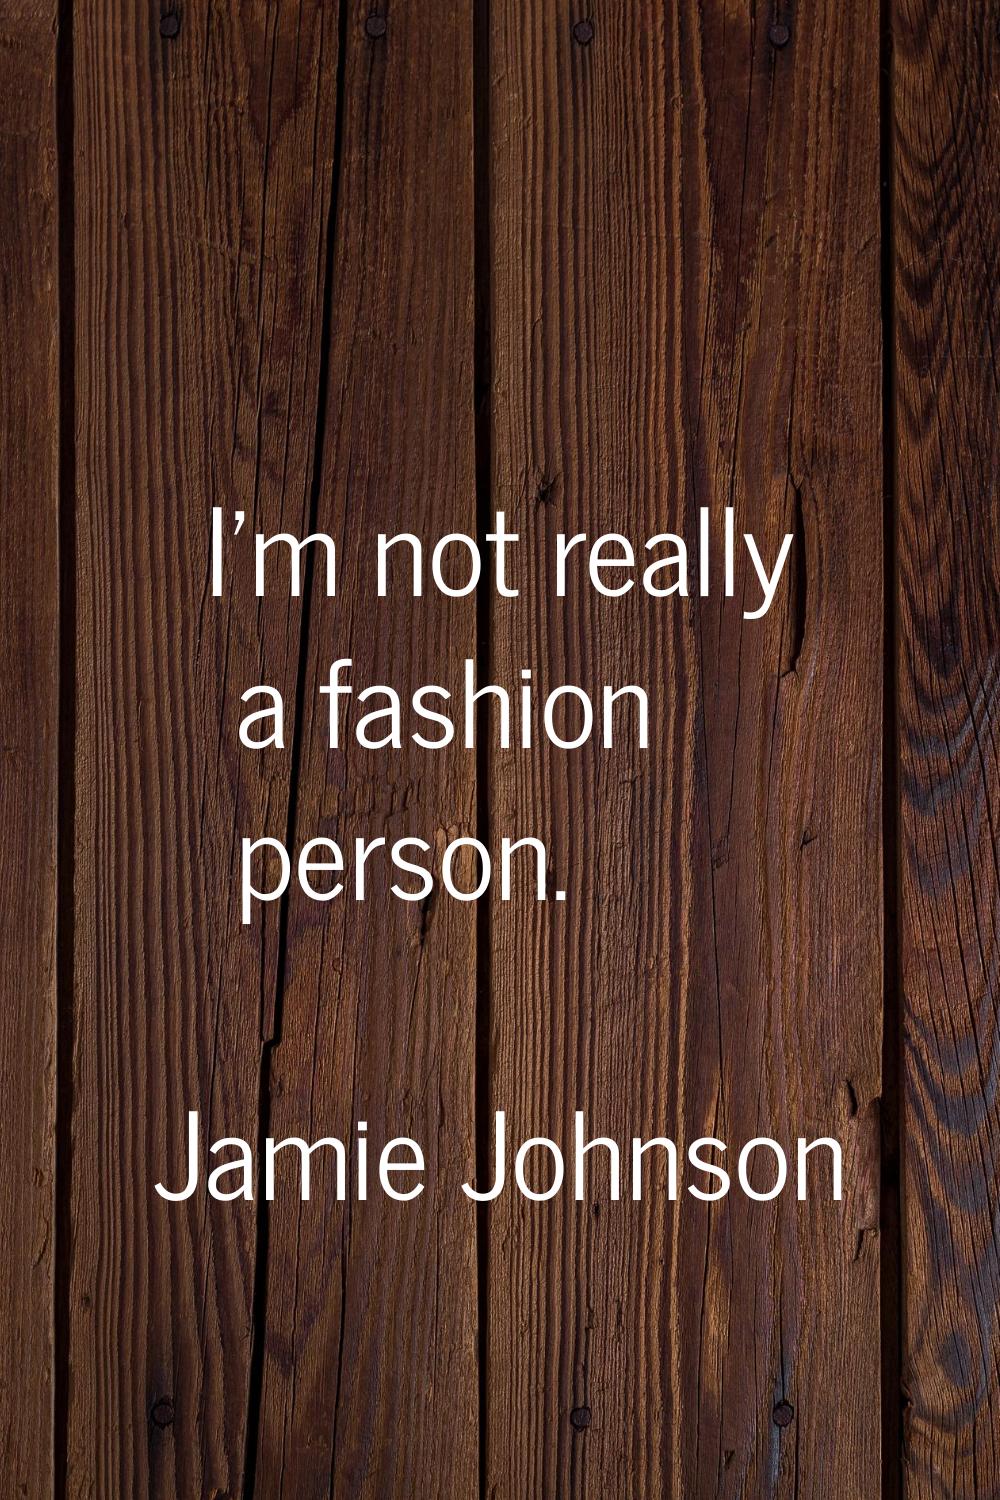 I'm not really a fashion person.